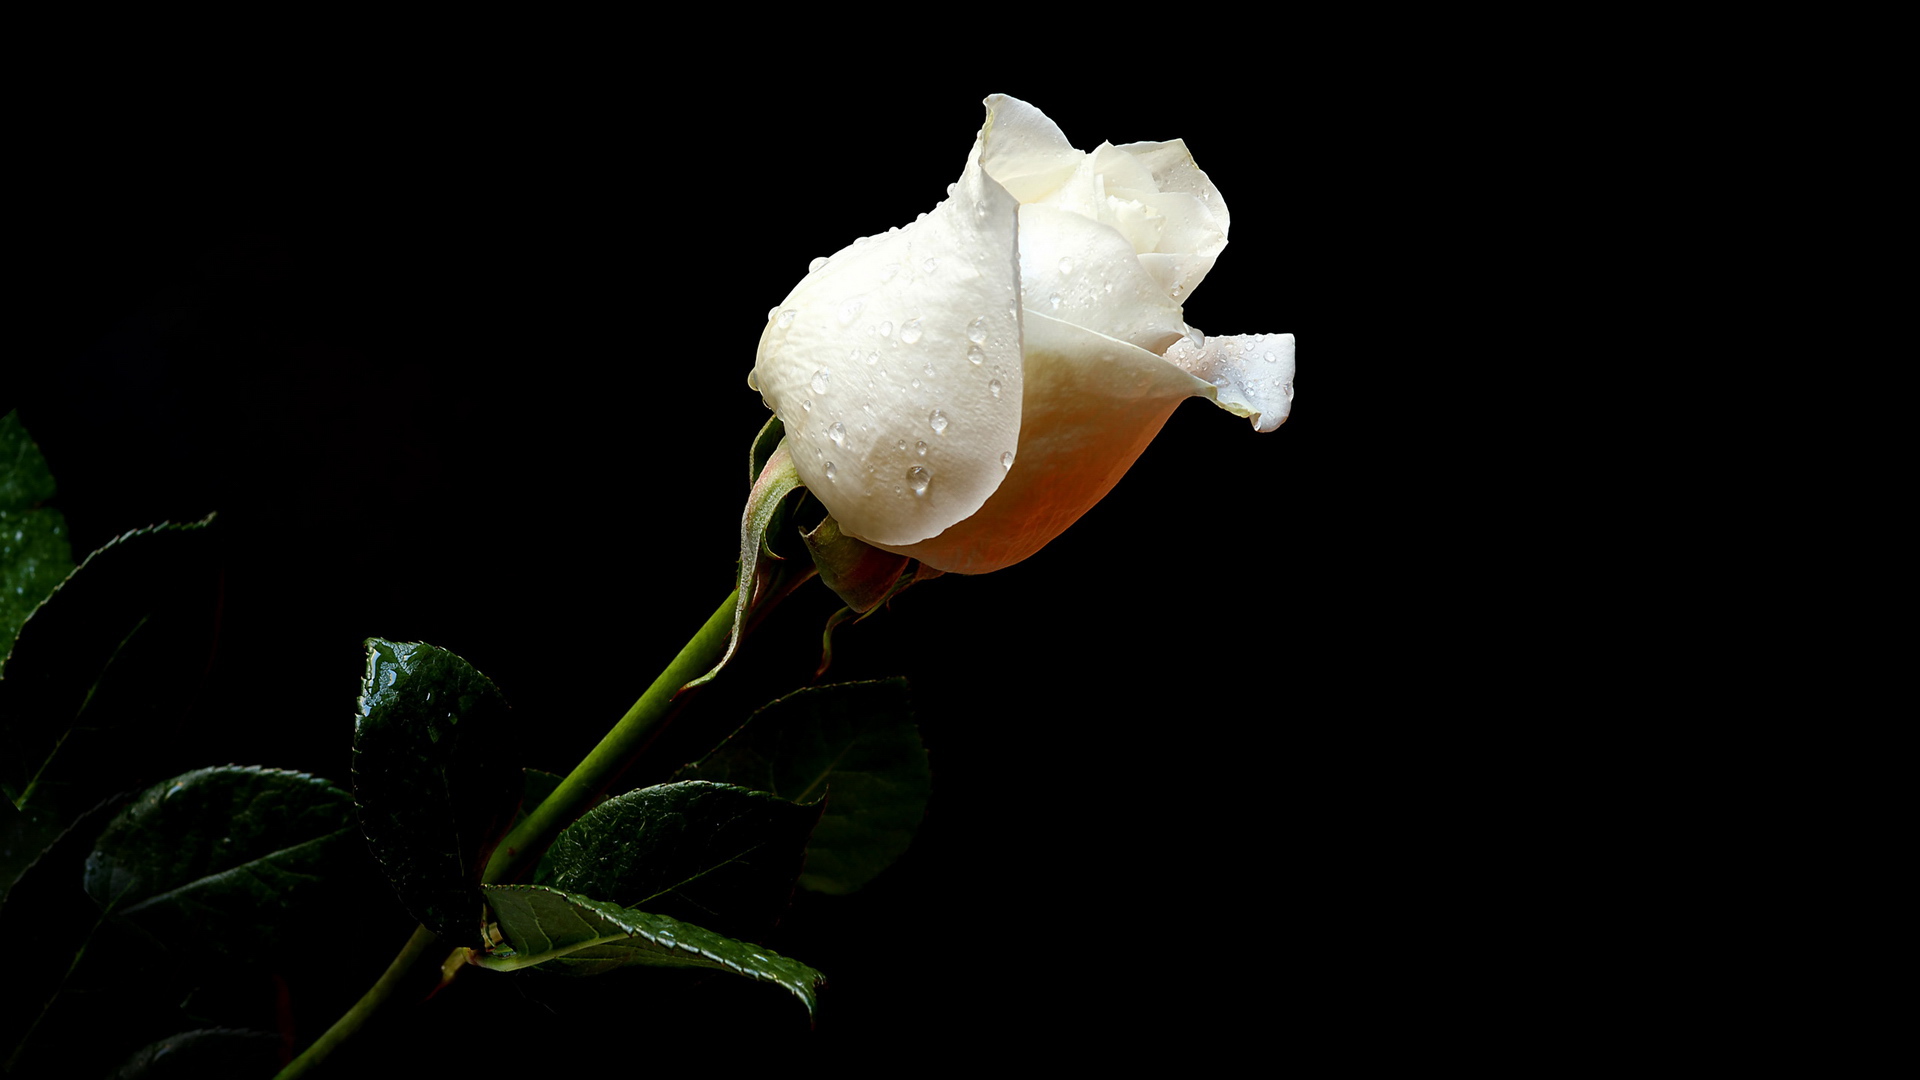 Wet white rose on a black background wallpapers and images